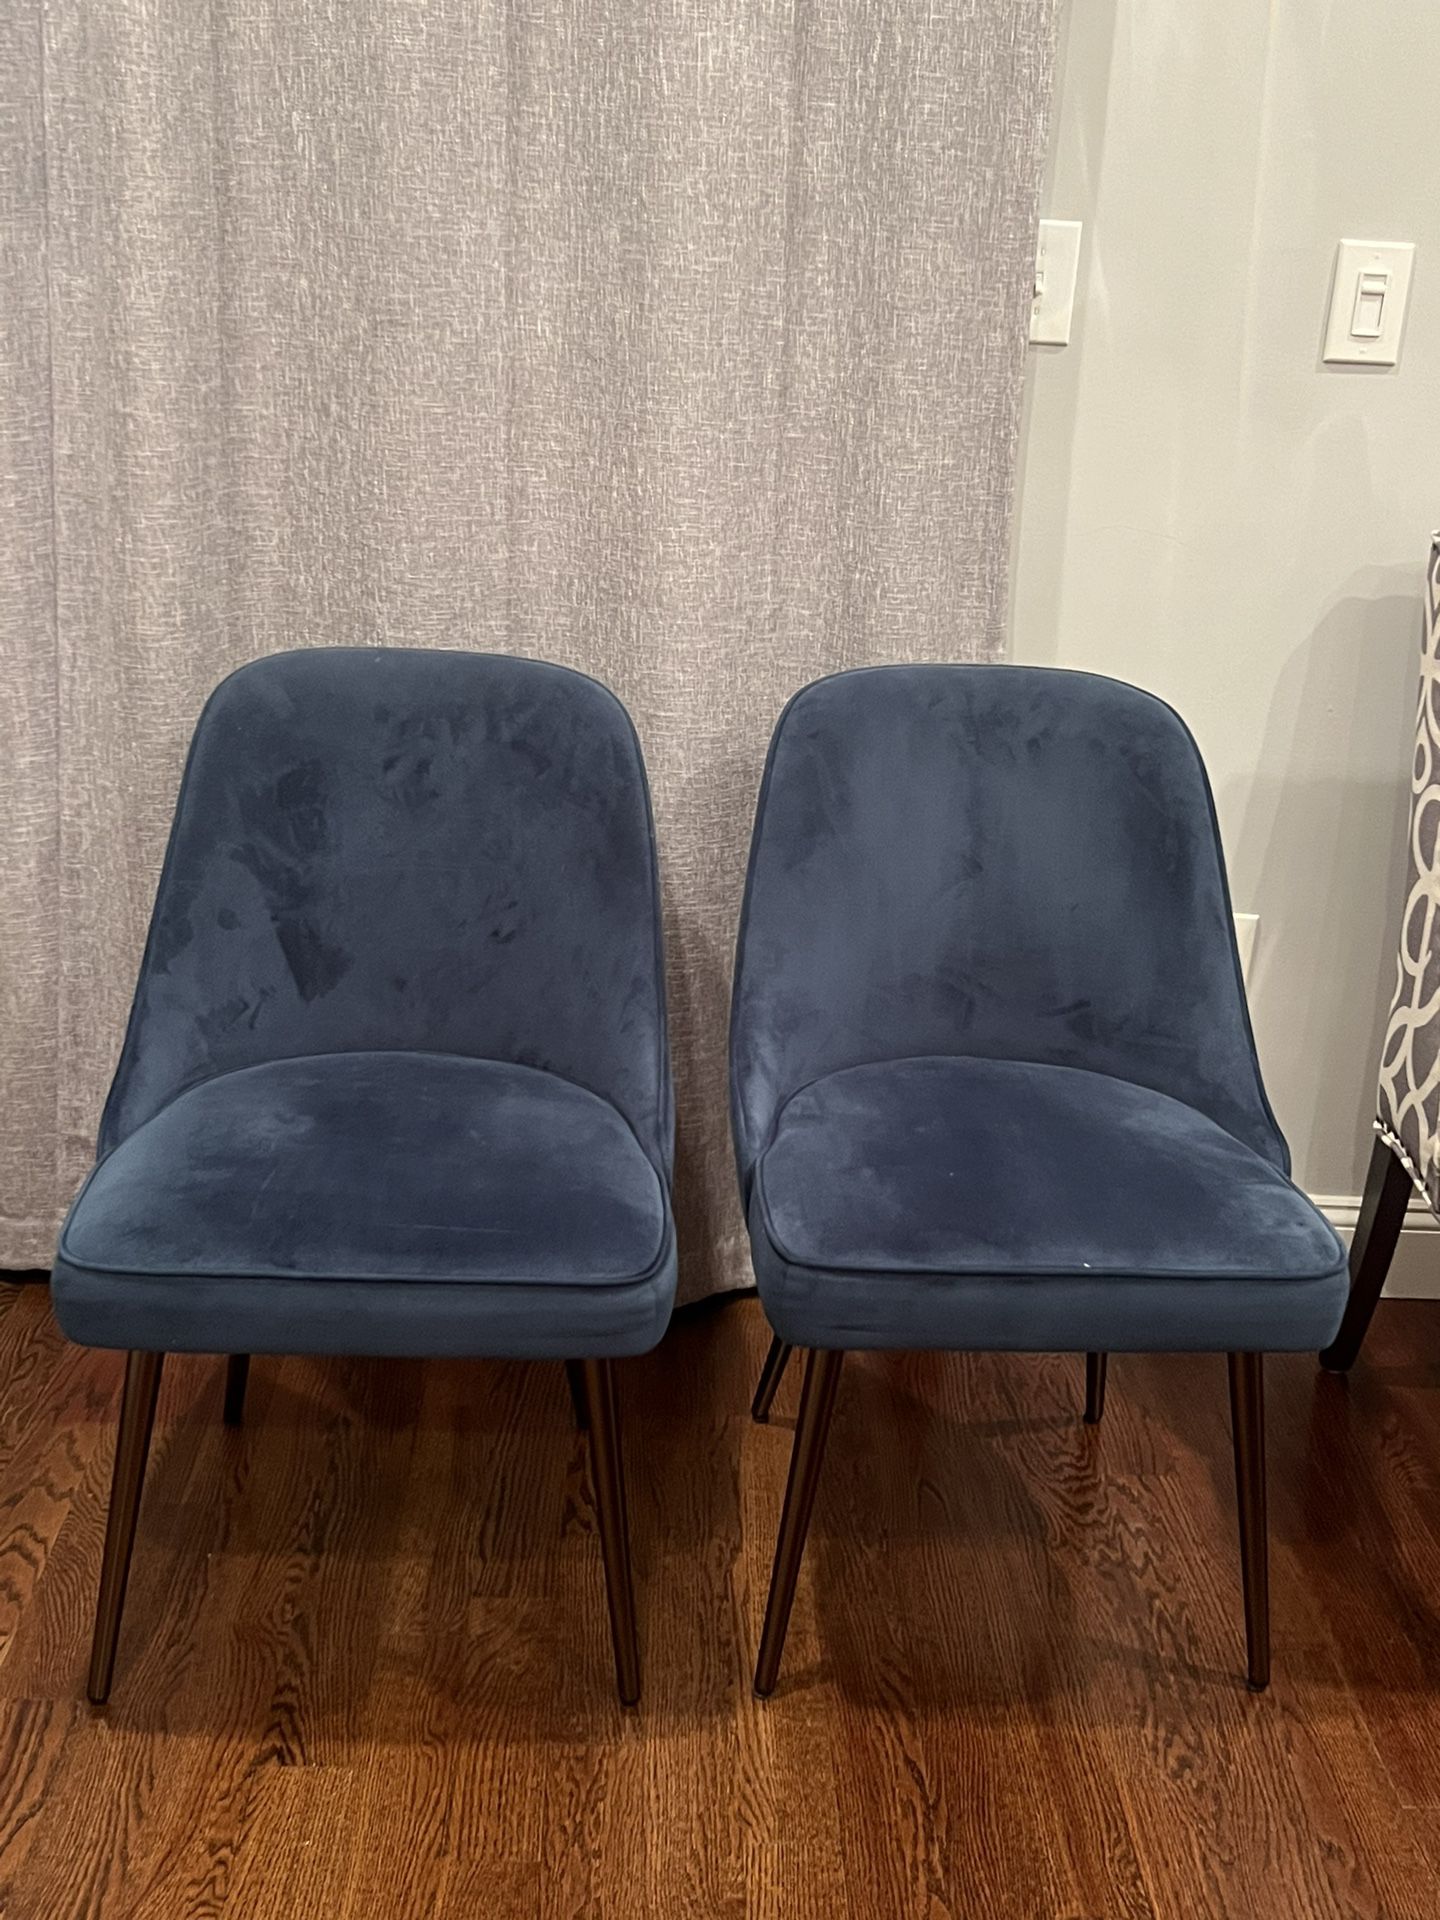 Blue Suede Chairs  ( 4 Chairs )